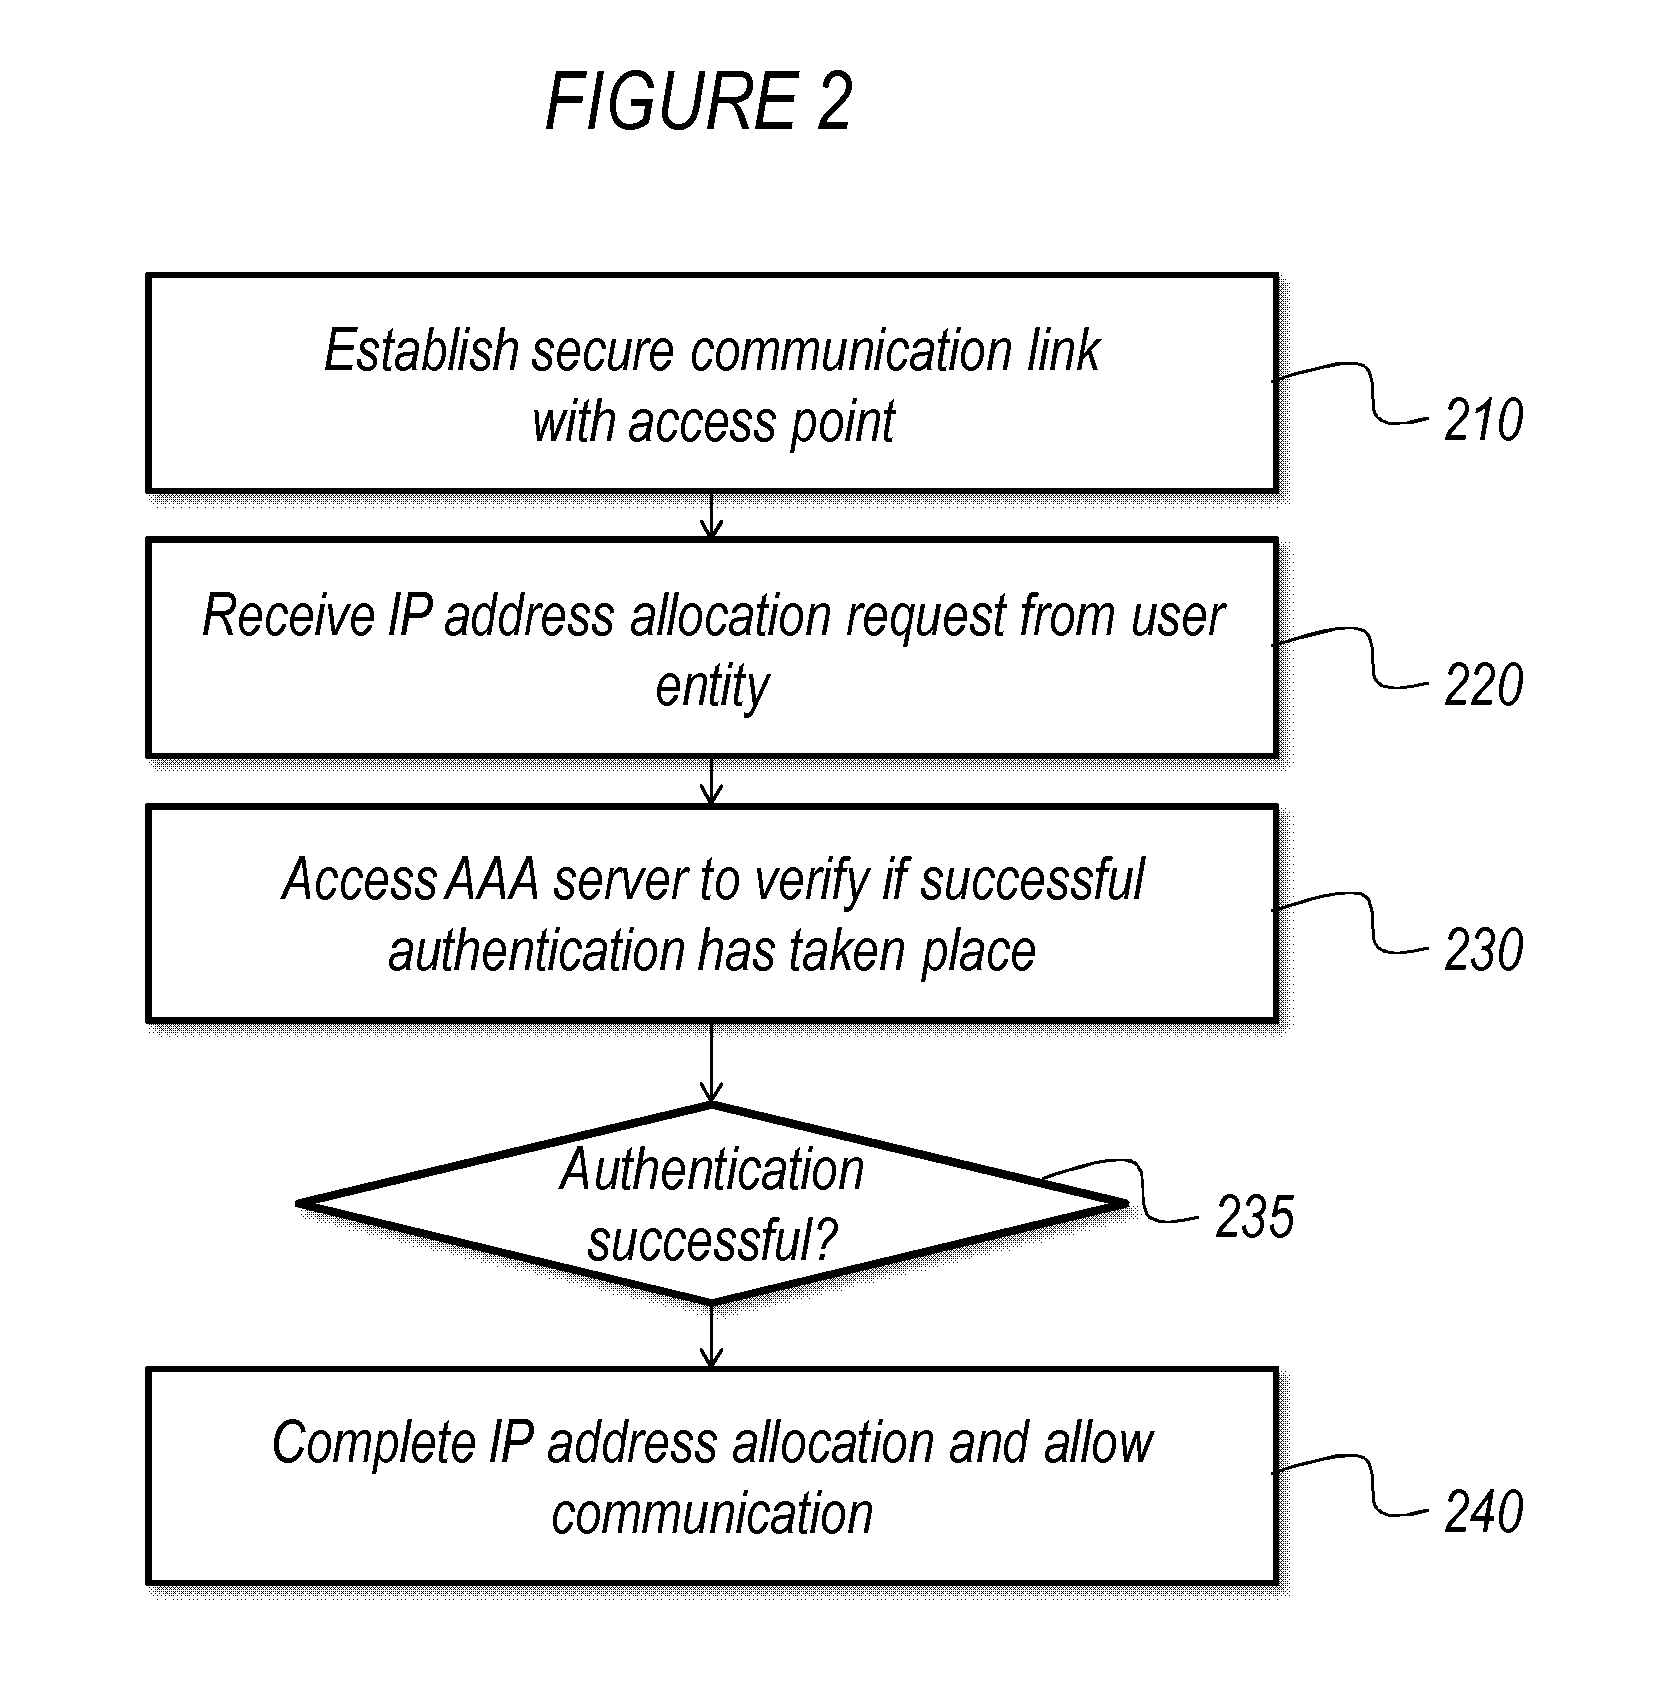 Method and apparatus for providing network access to a user entity